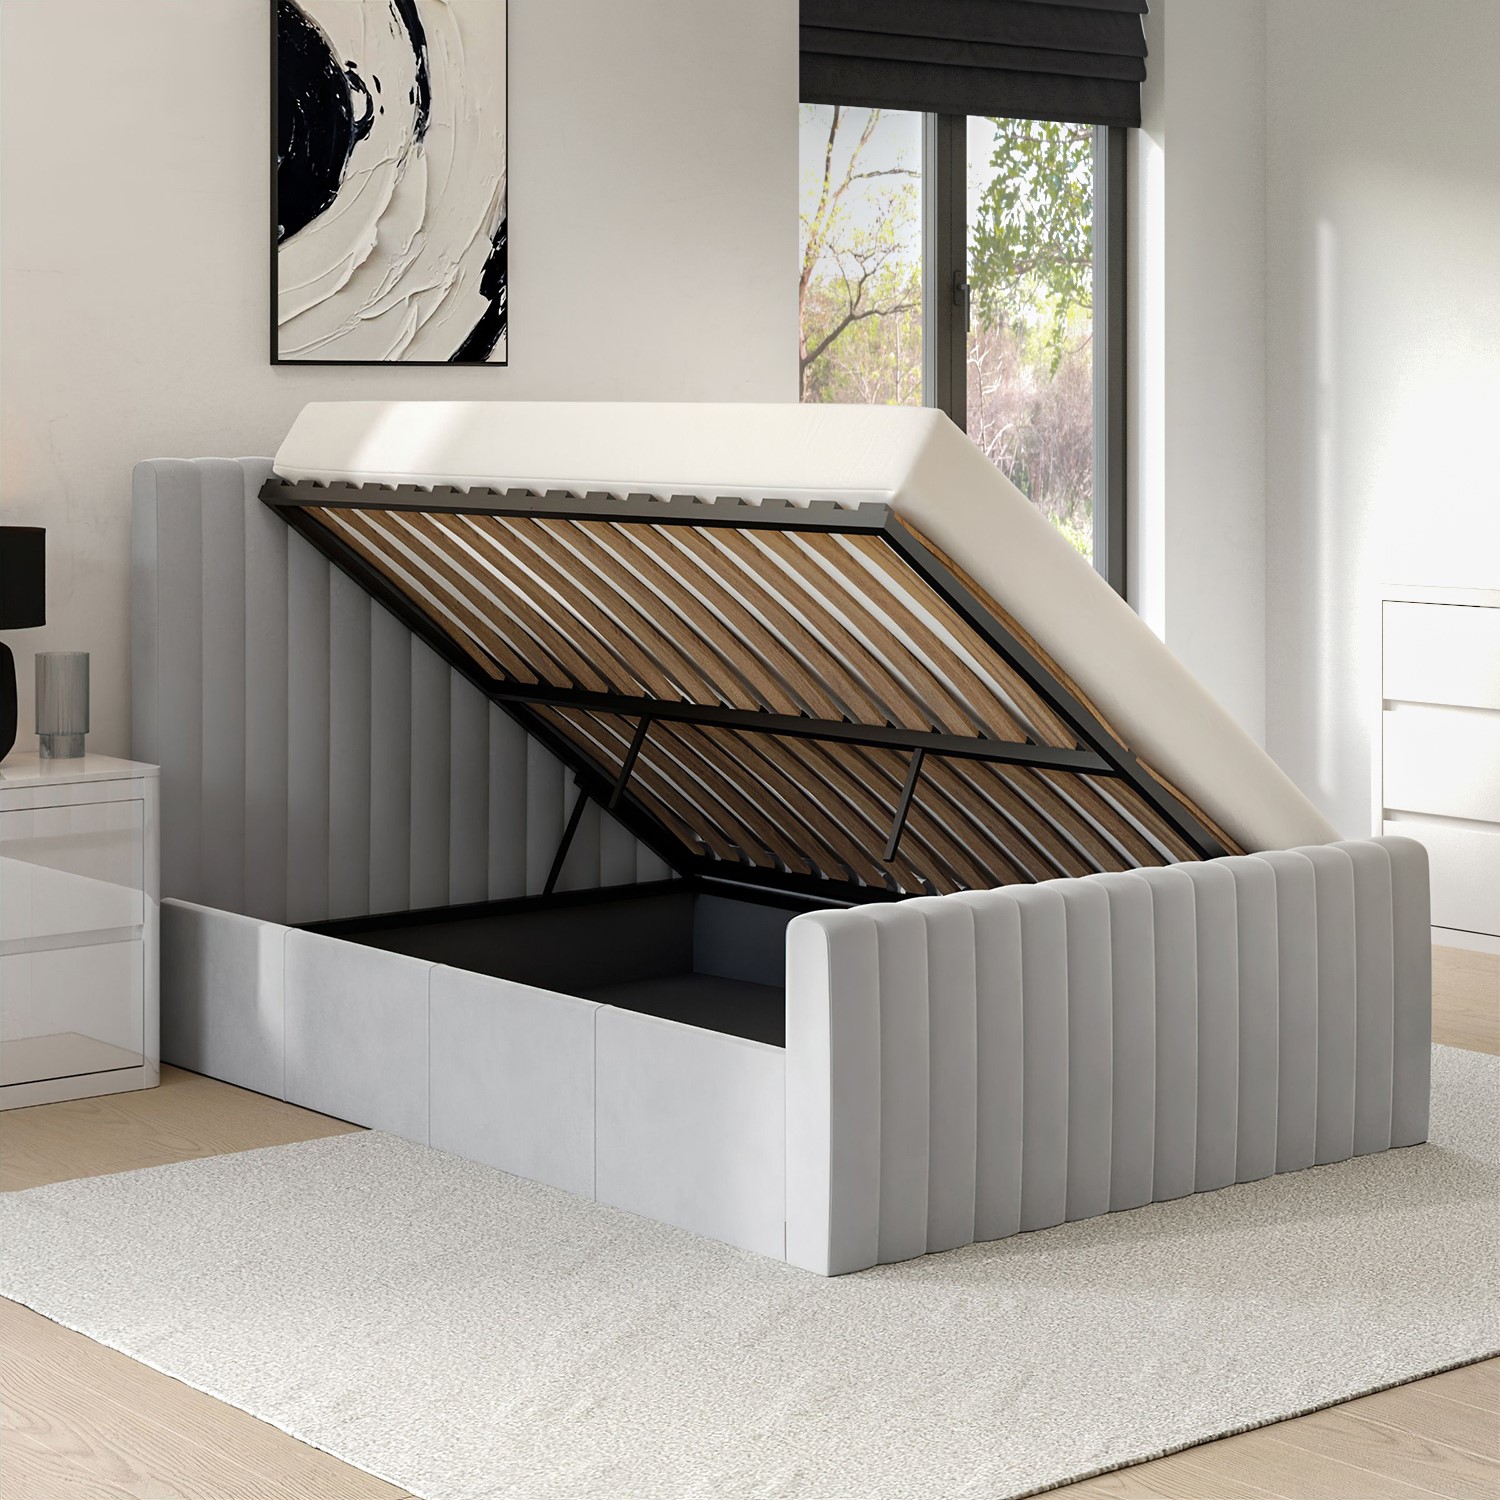 Read more about Side opening grey velvet king size ottoman bed khloe